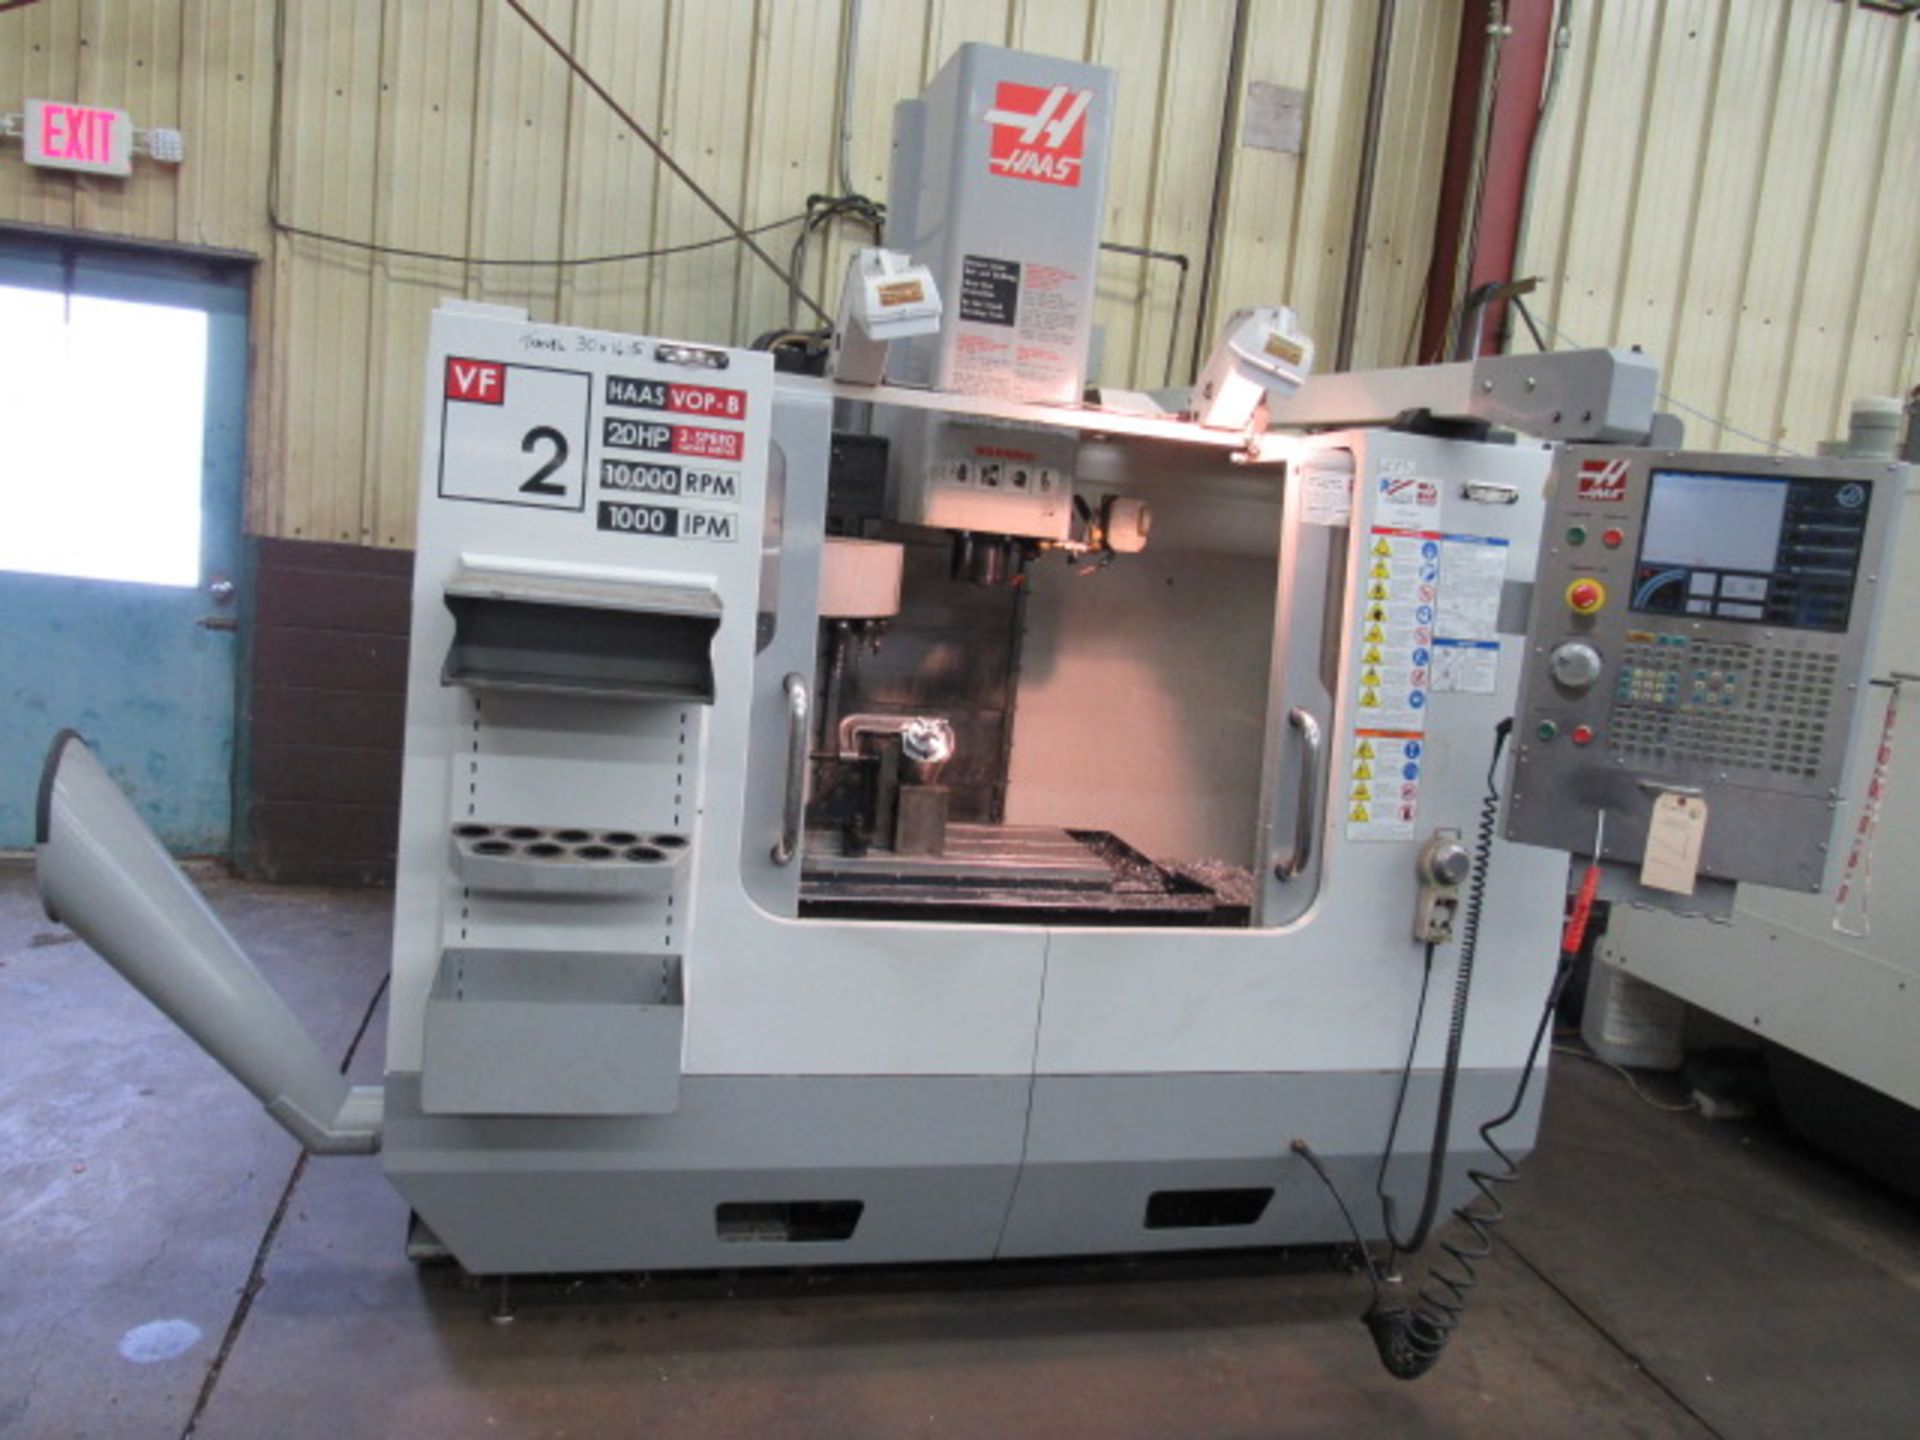 Haas VF-2 CNC Vertical Machining Center - Image 2 of 6